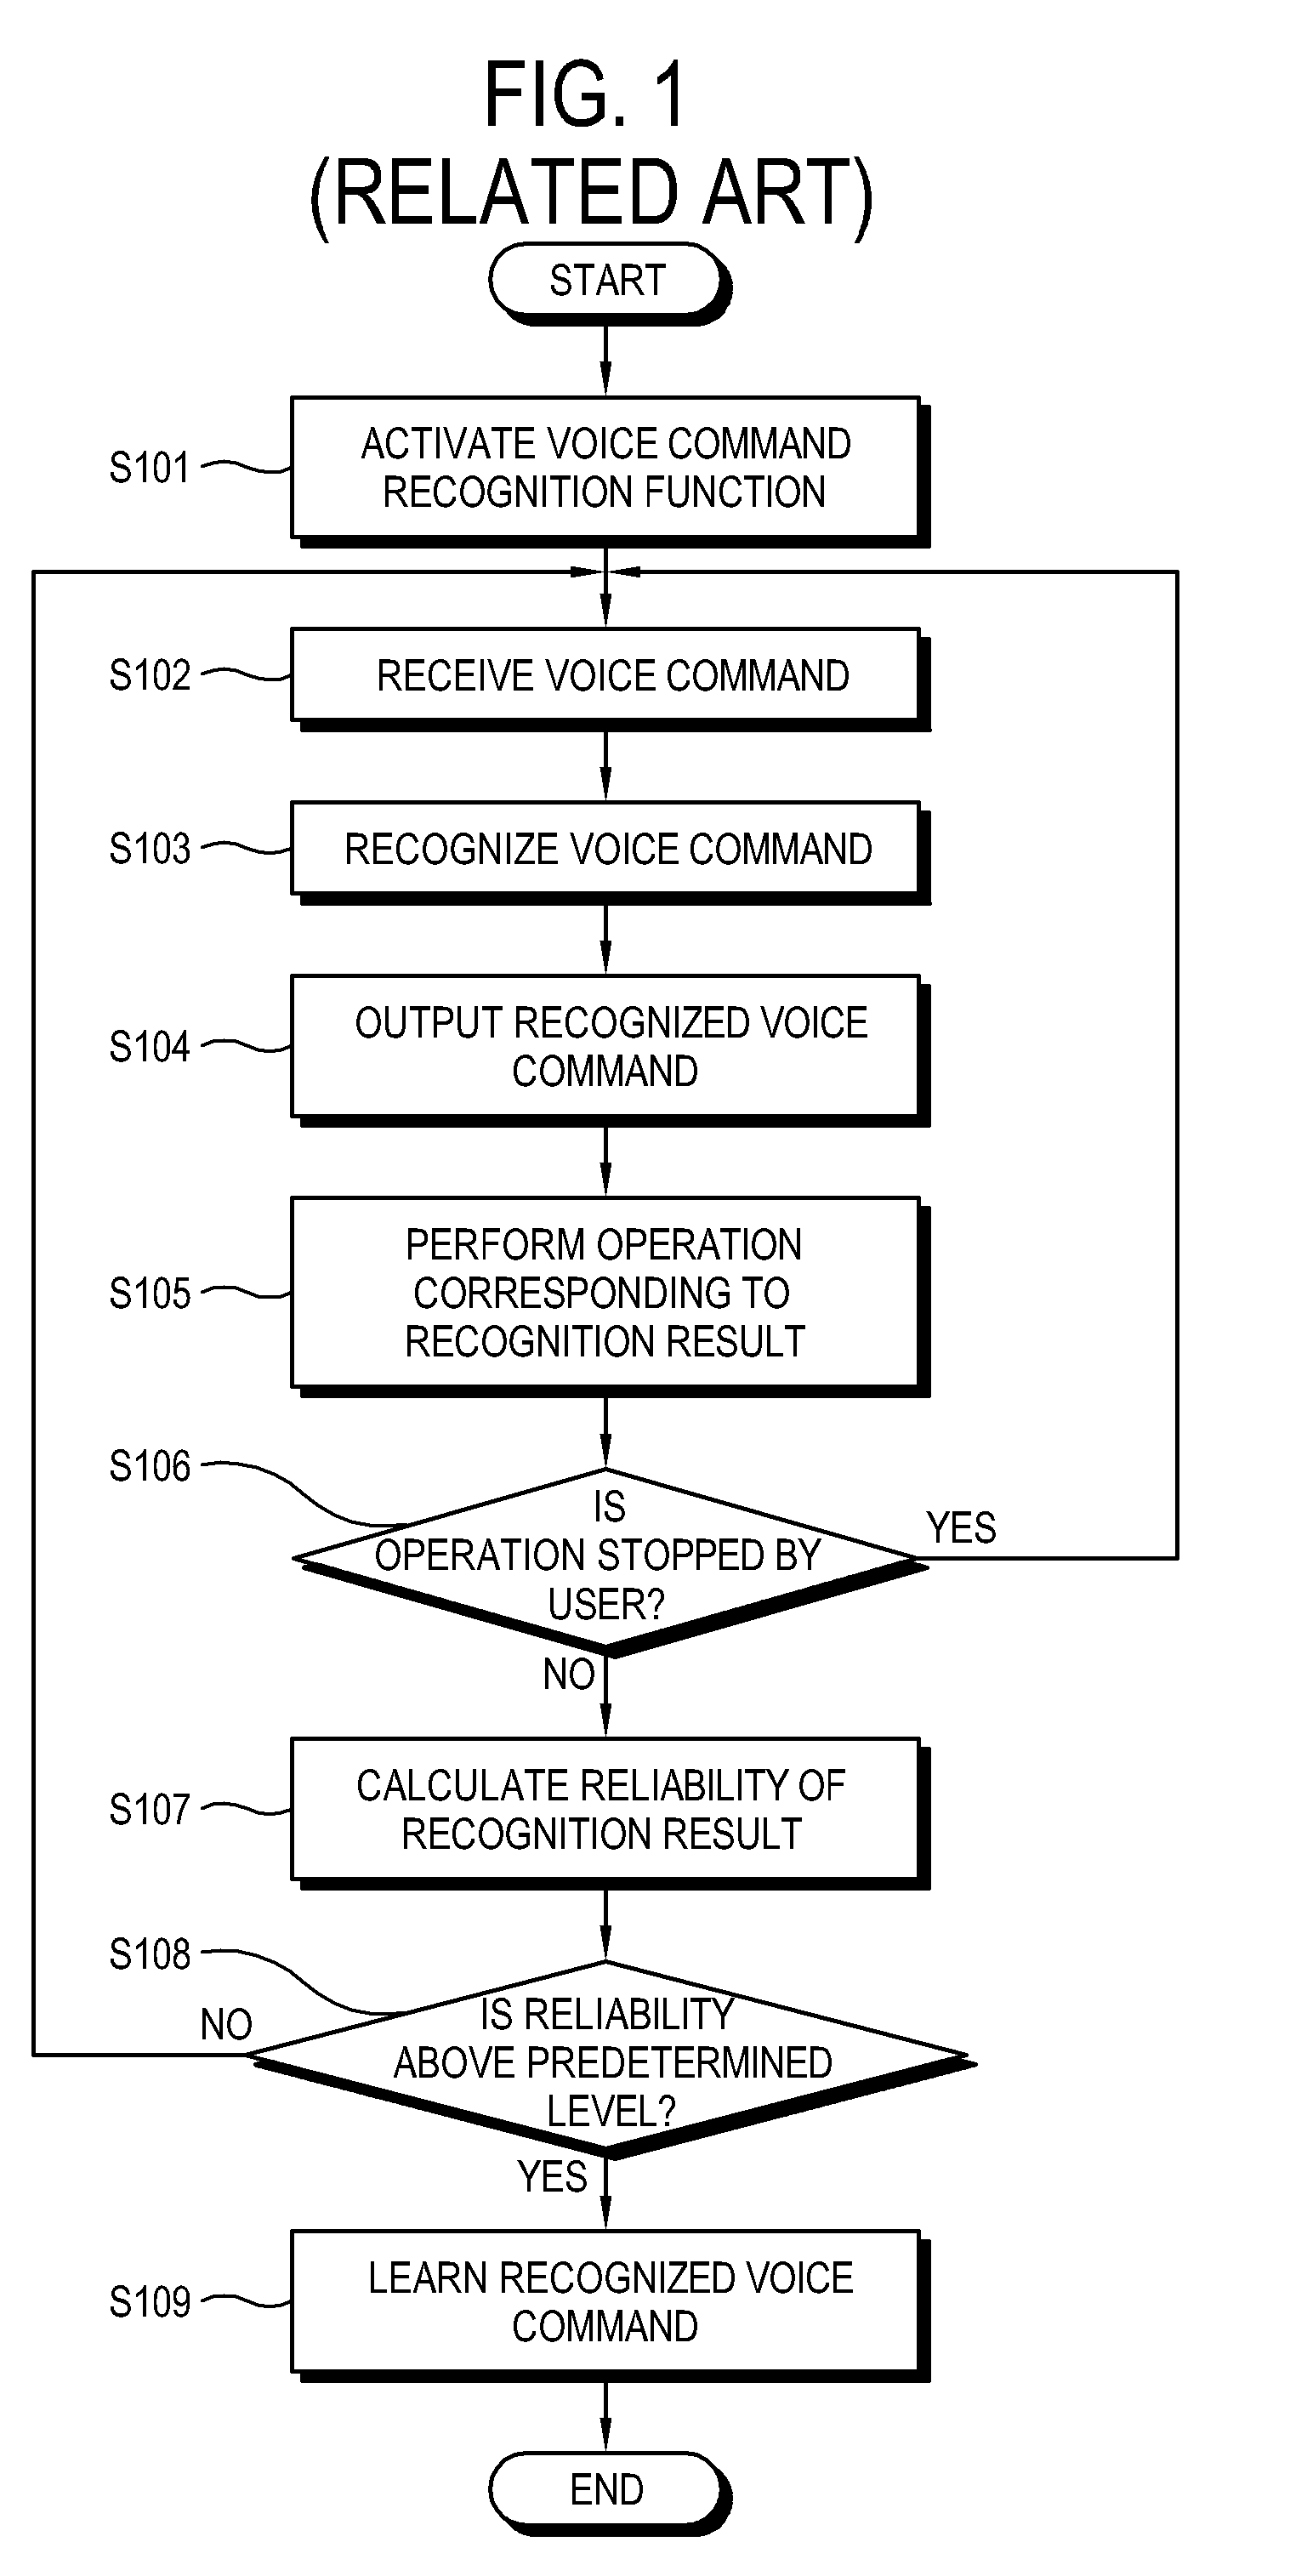 Signal processing apparatus and method of recognizing a voice command thereof